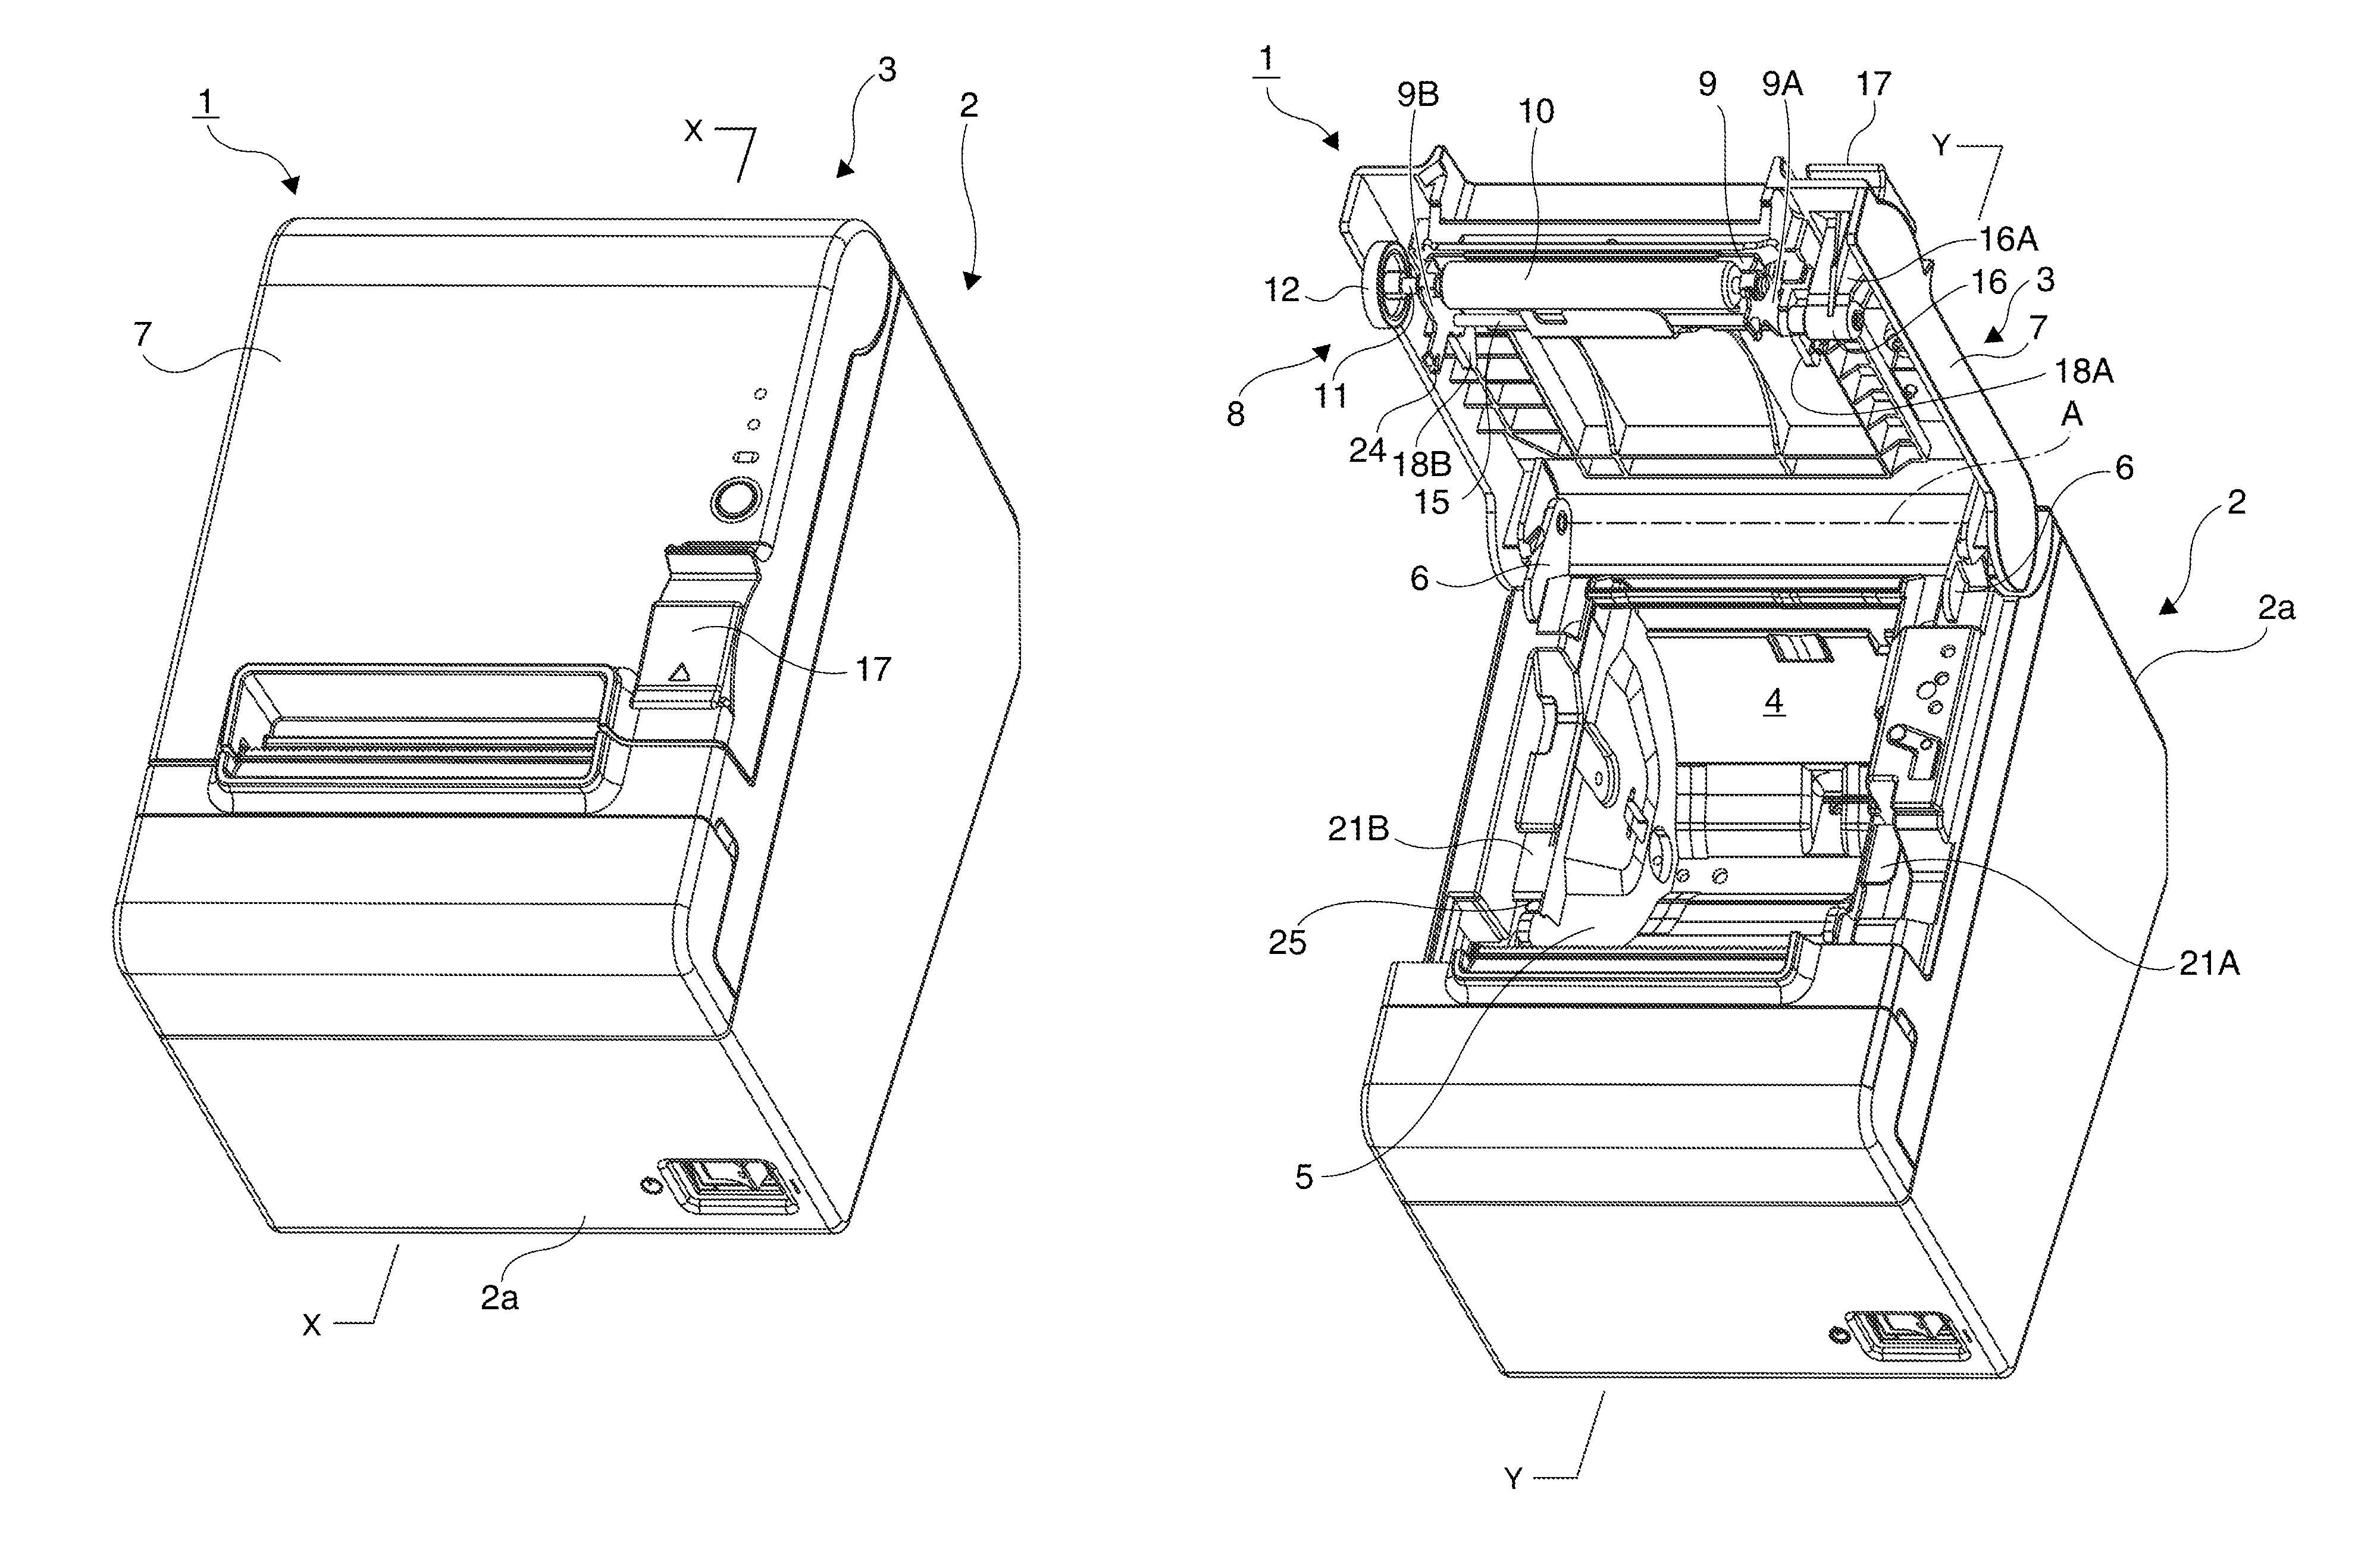 Cover unit and printer